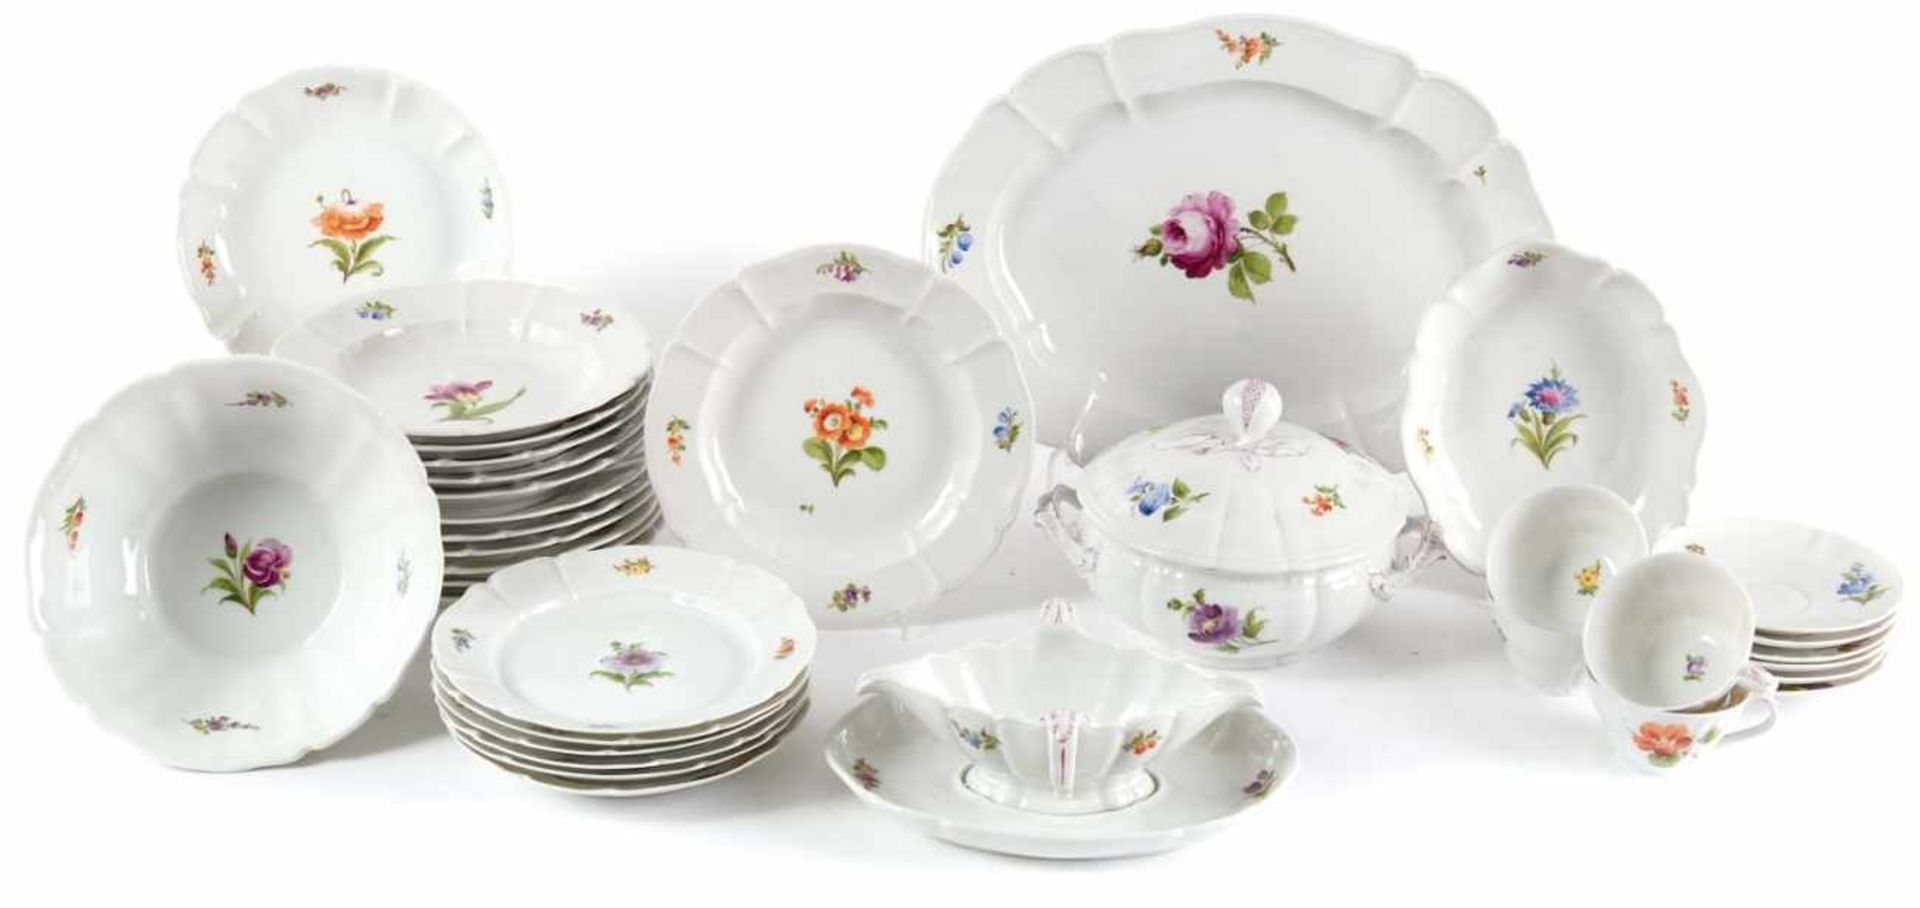 24 parts of a dinner service with floral decoration